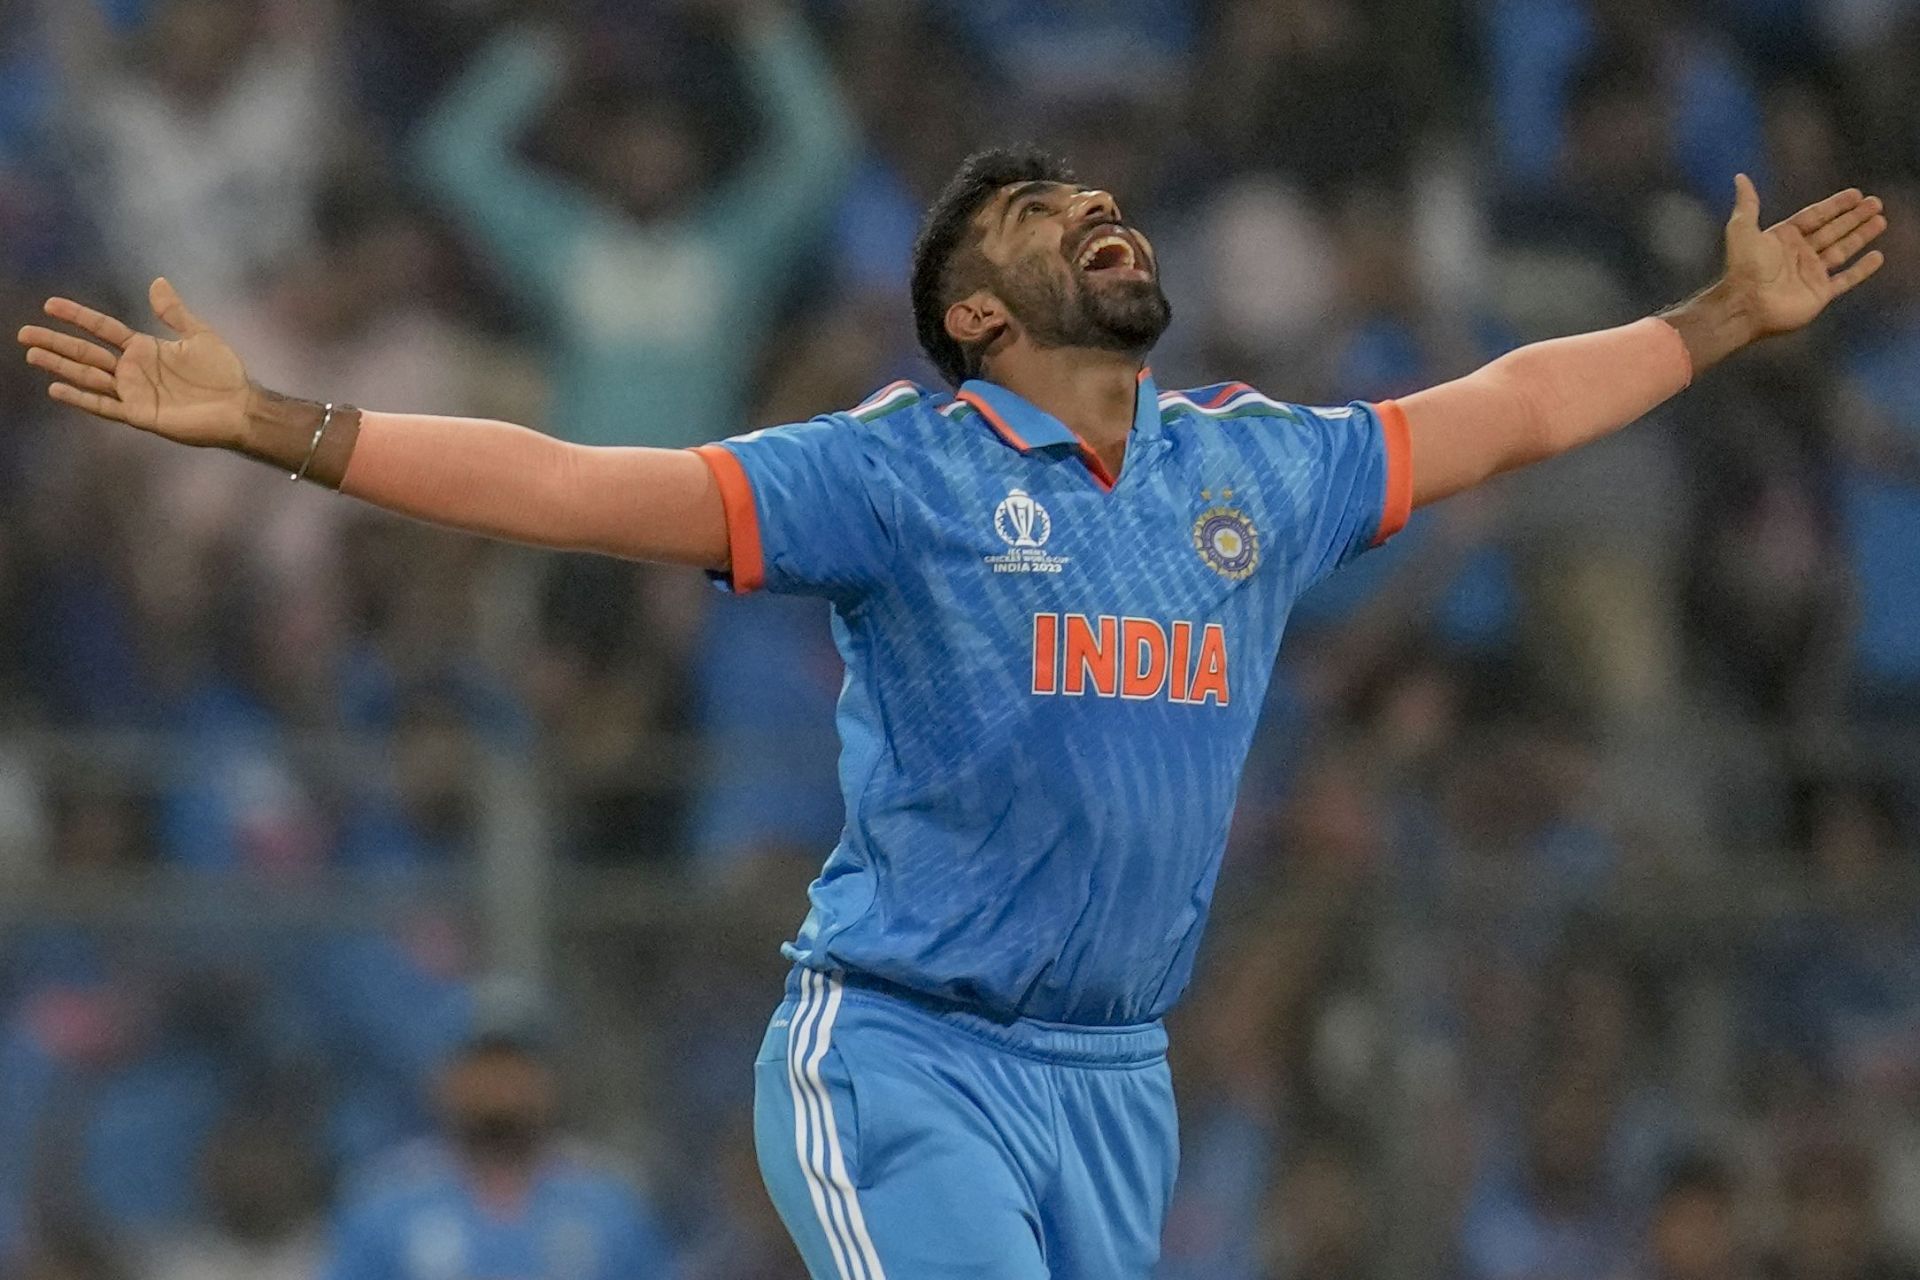 Jasprit Bumrah has been sensational in the World Cup so far.